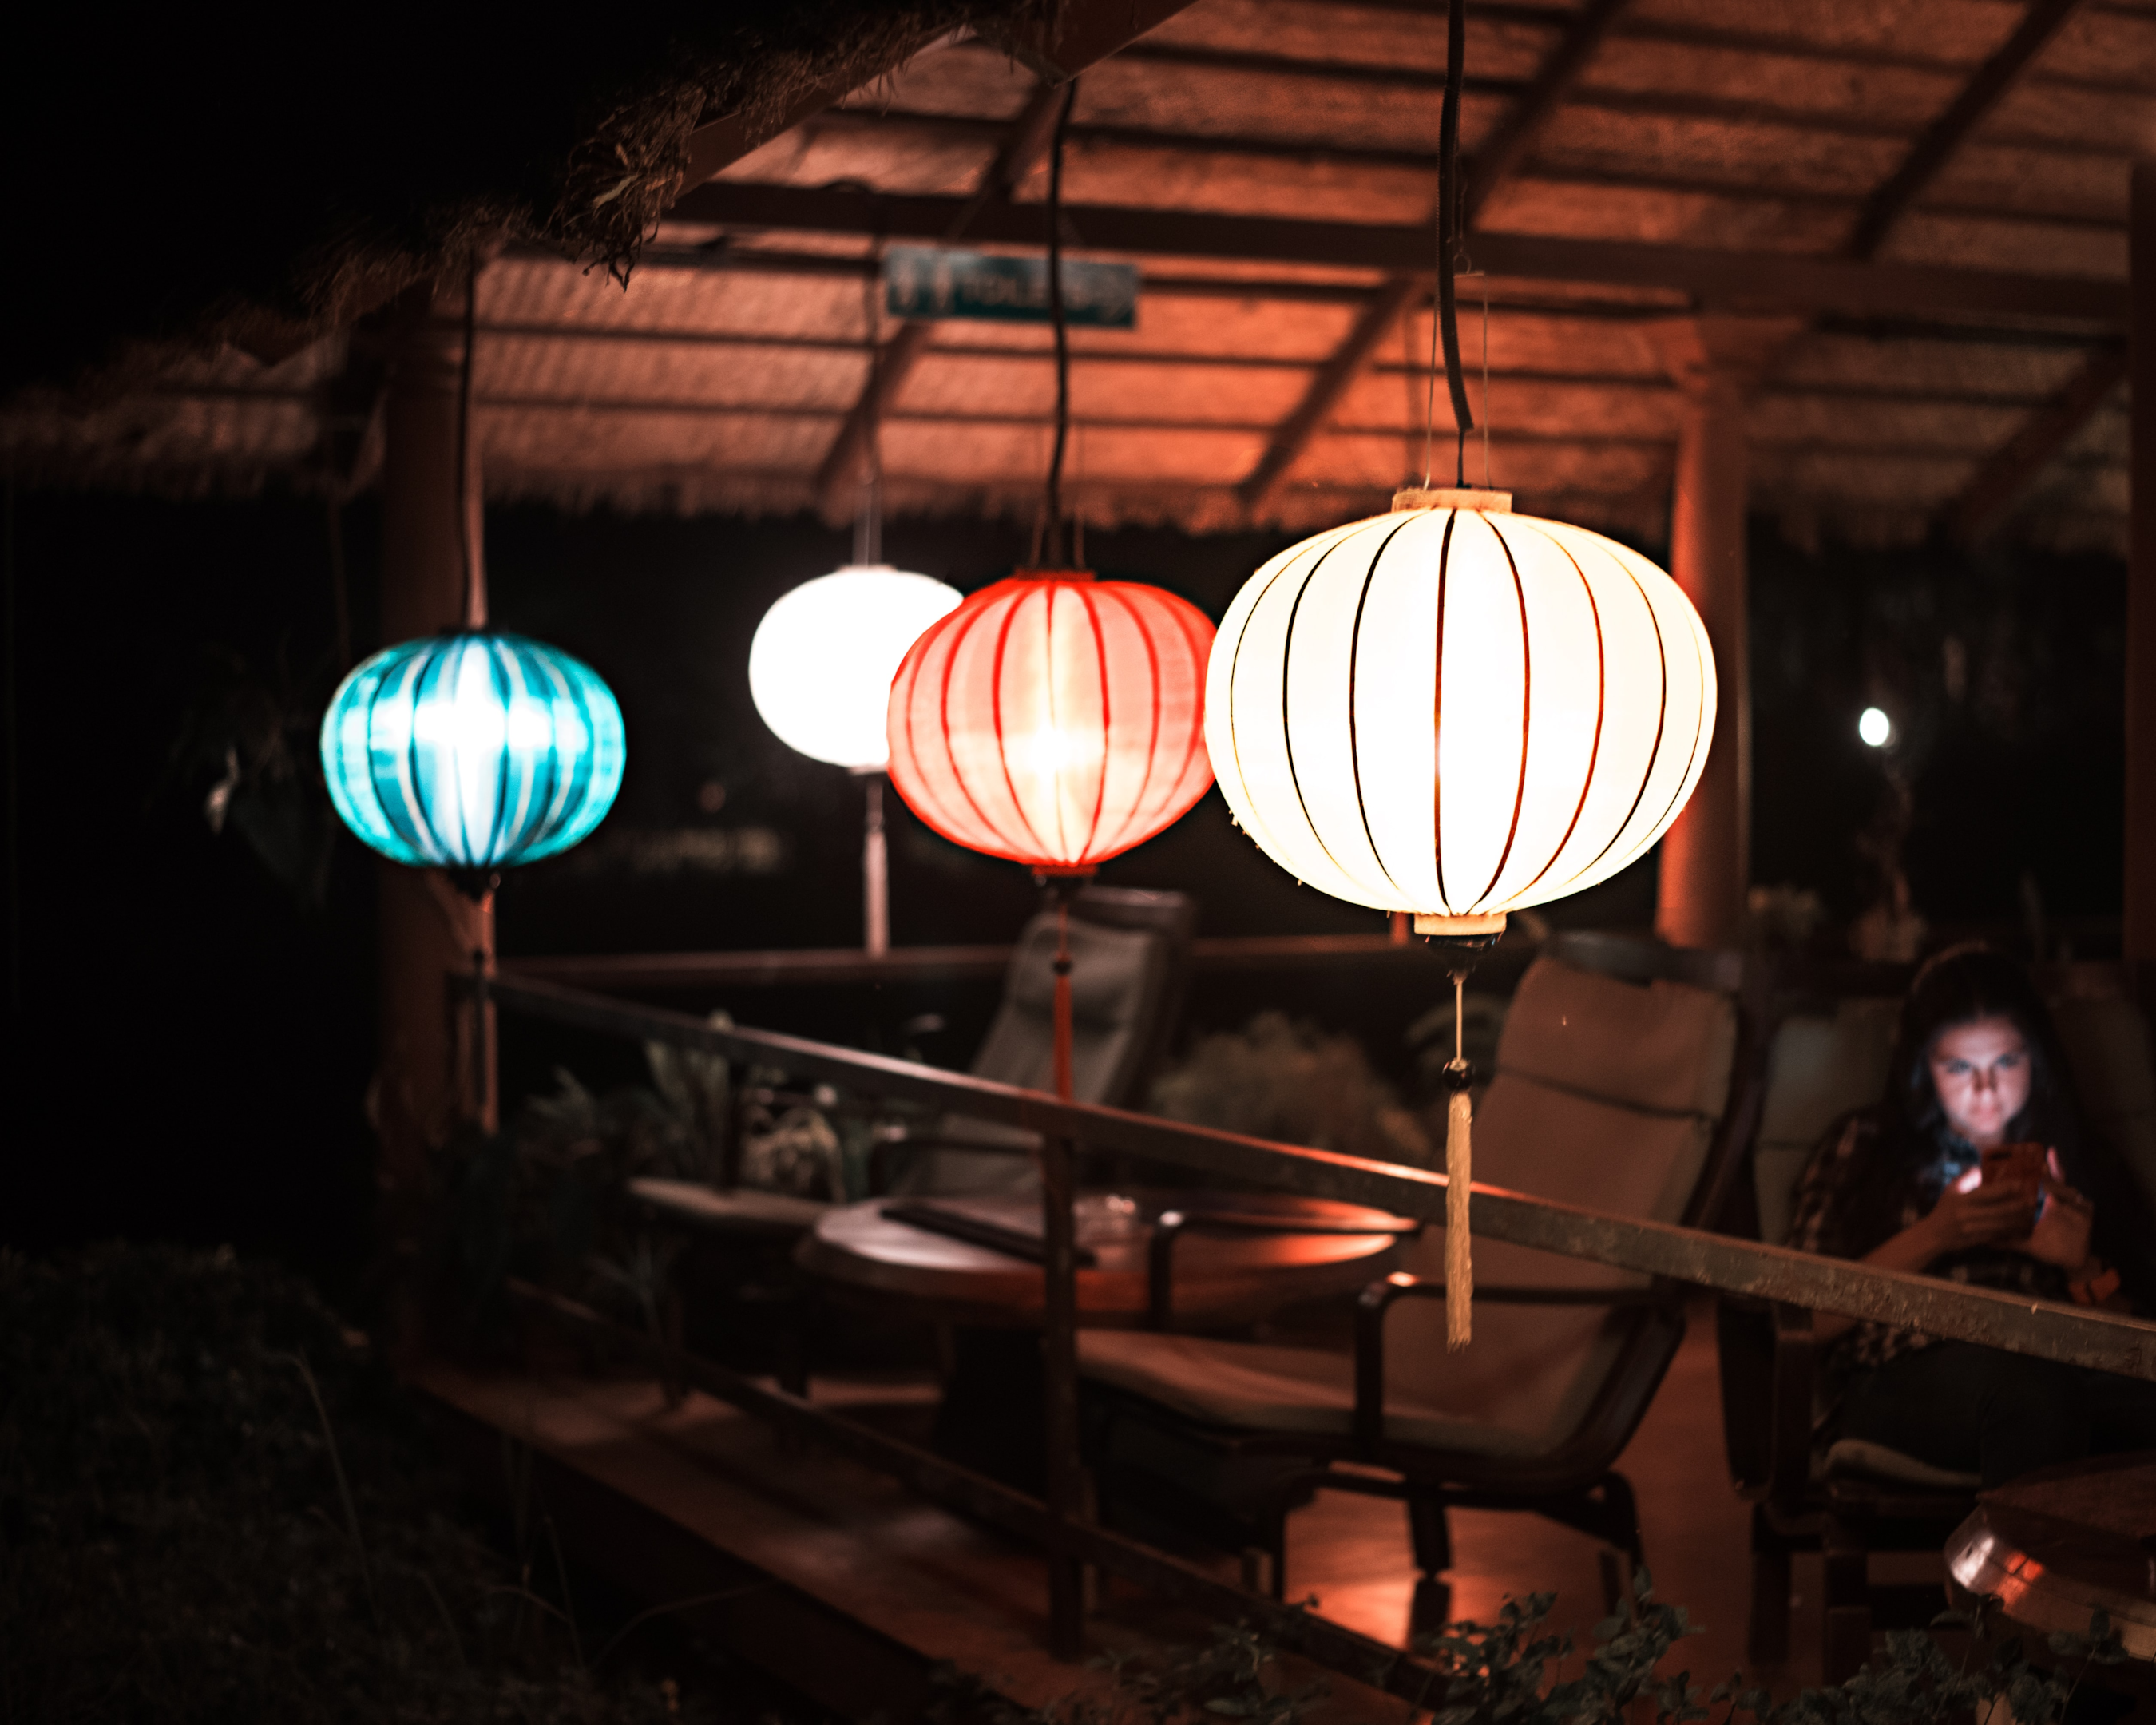 Lanterns as decoration for the outside area